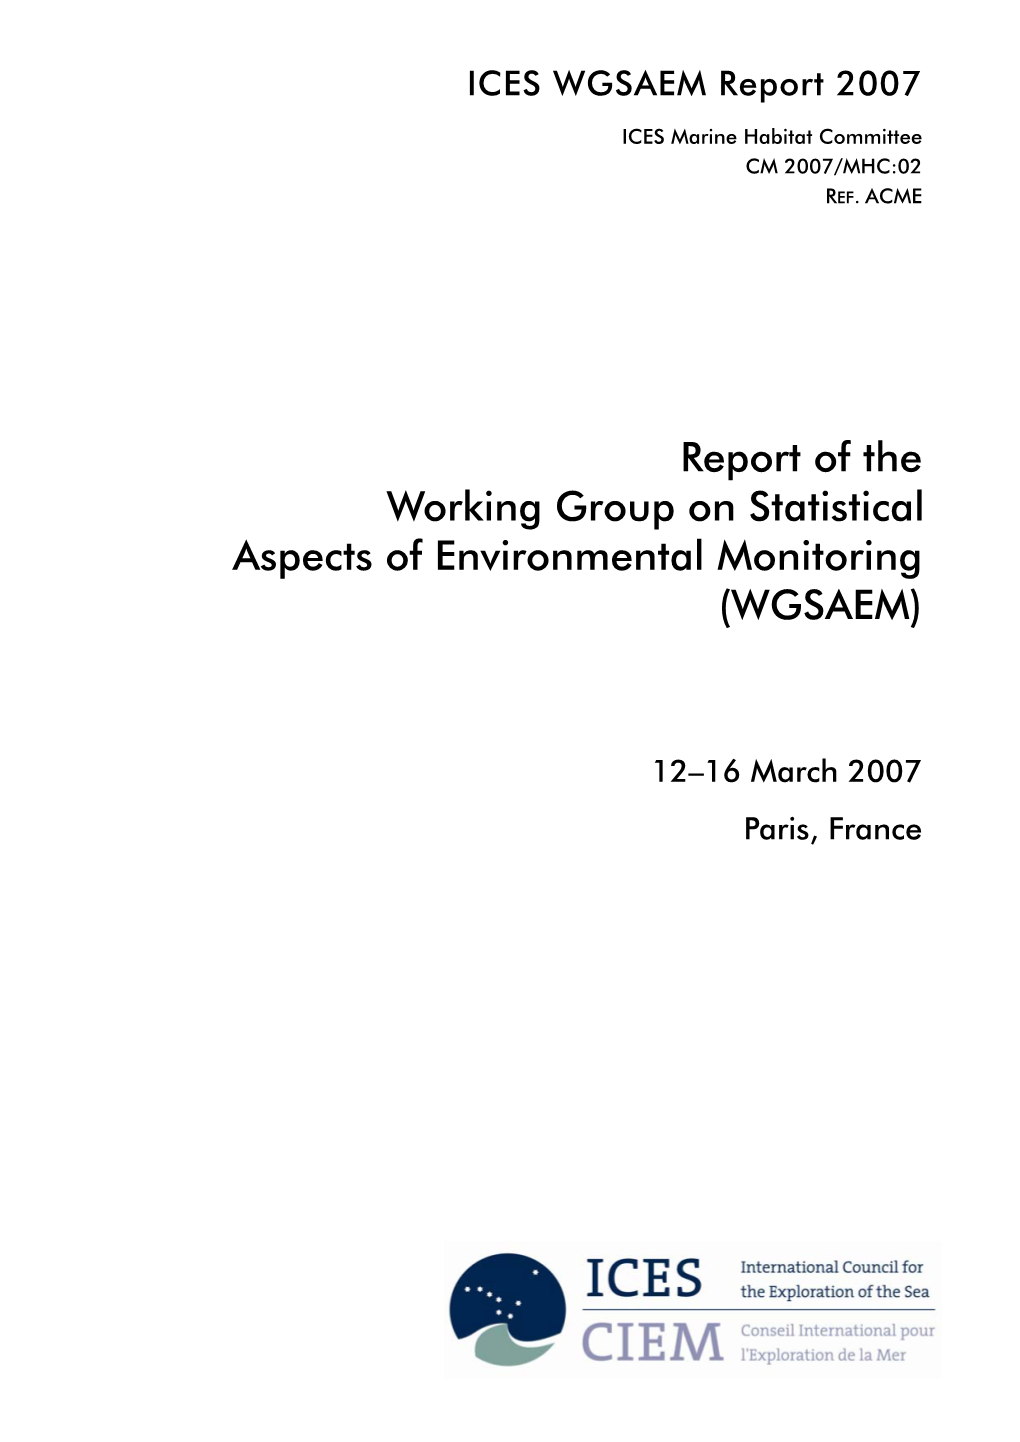 Report of the Working Group on Statistical Aspects of Environmental Monitoring (WGSAEM)